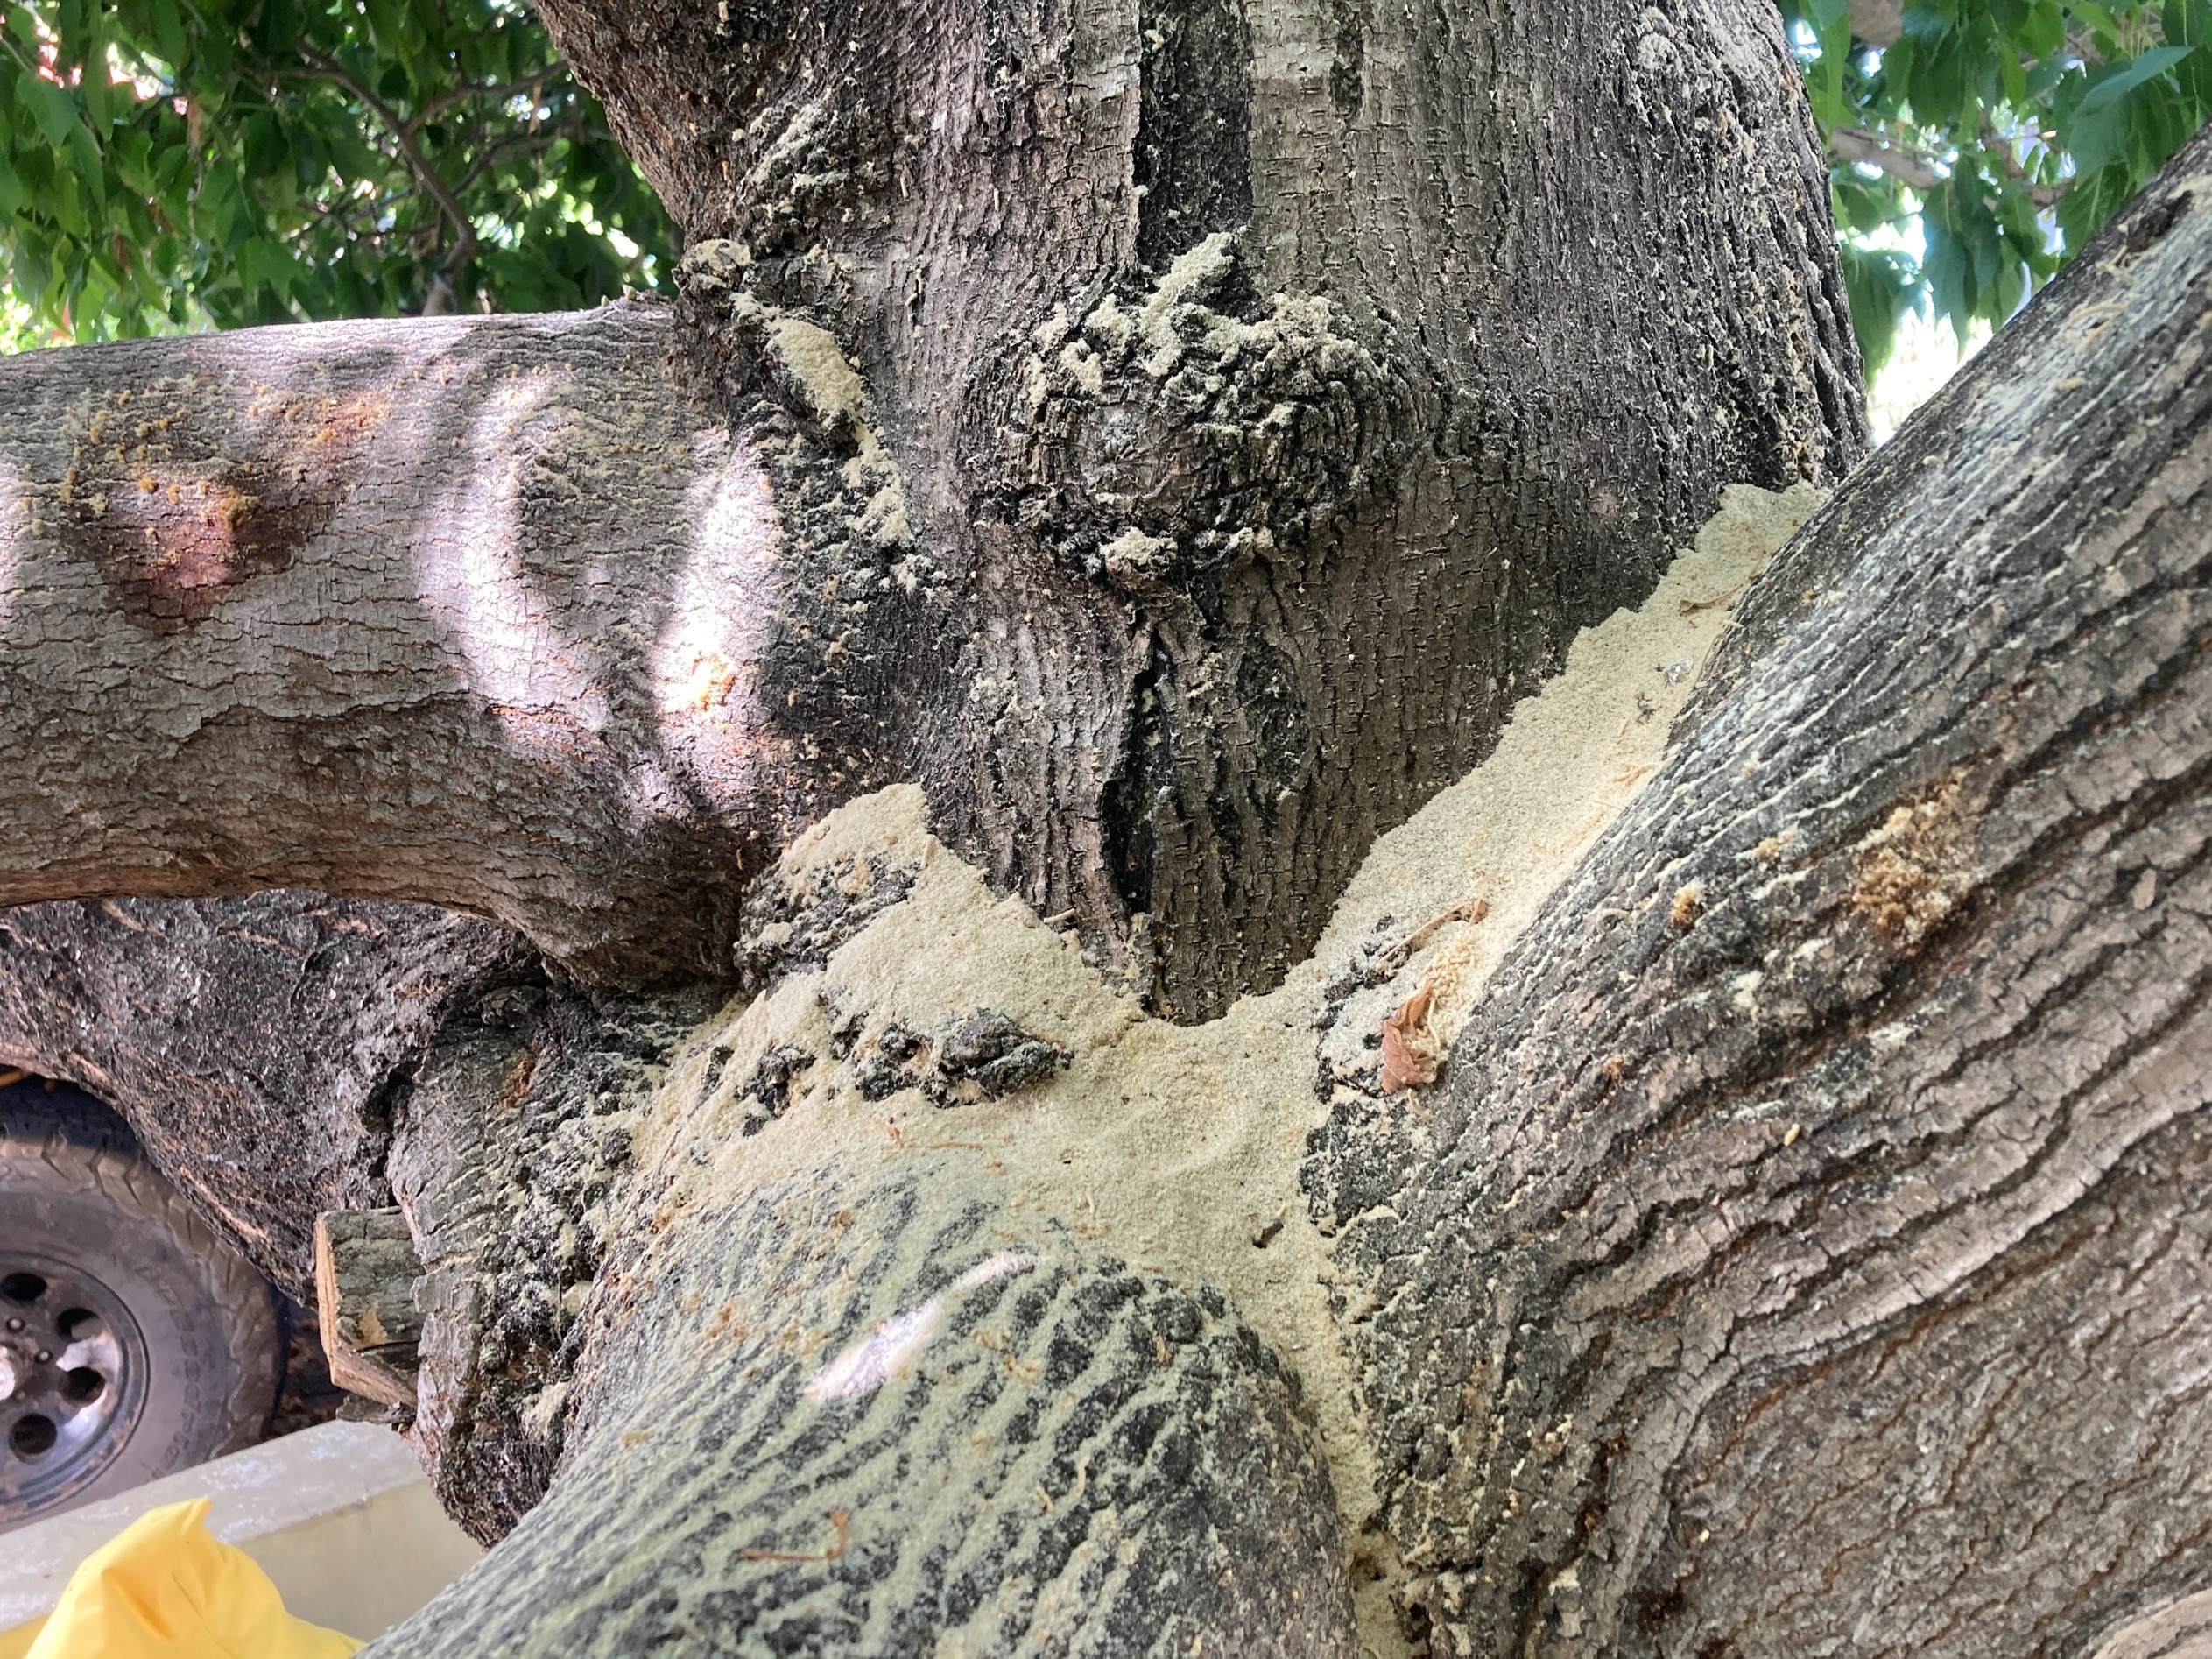 Tree covered in powdery residue (frass) on trunk.